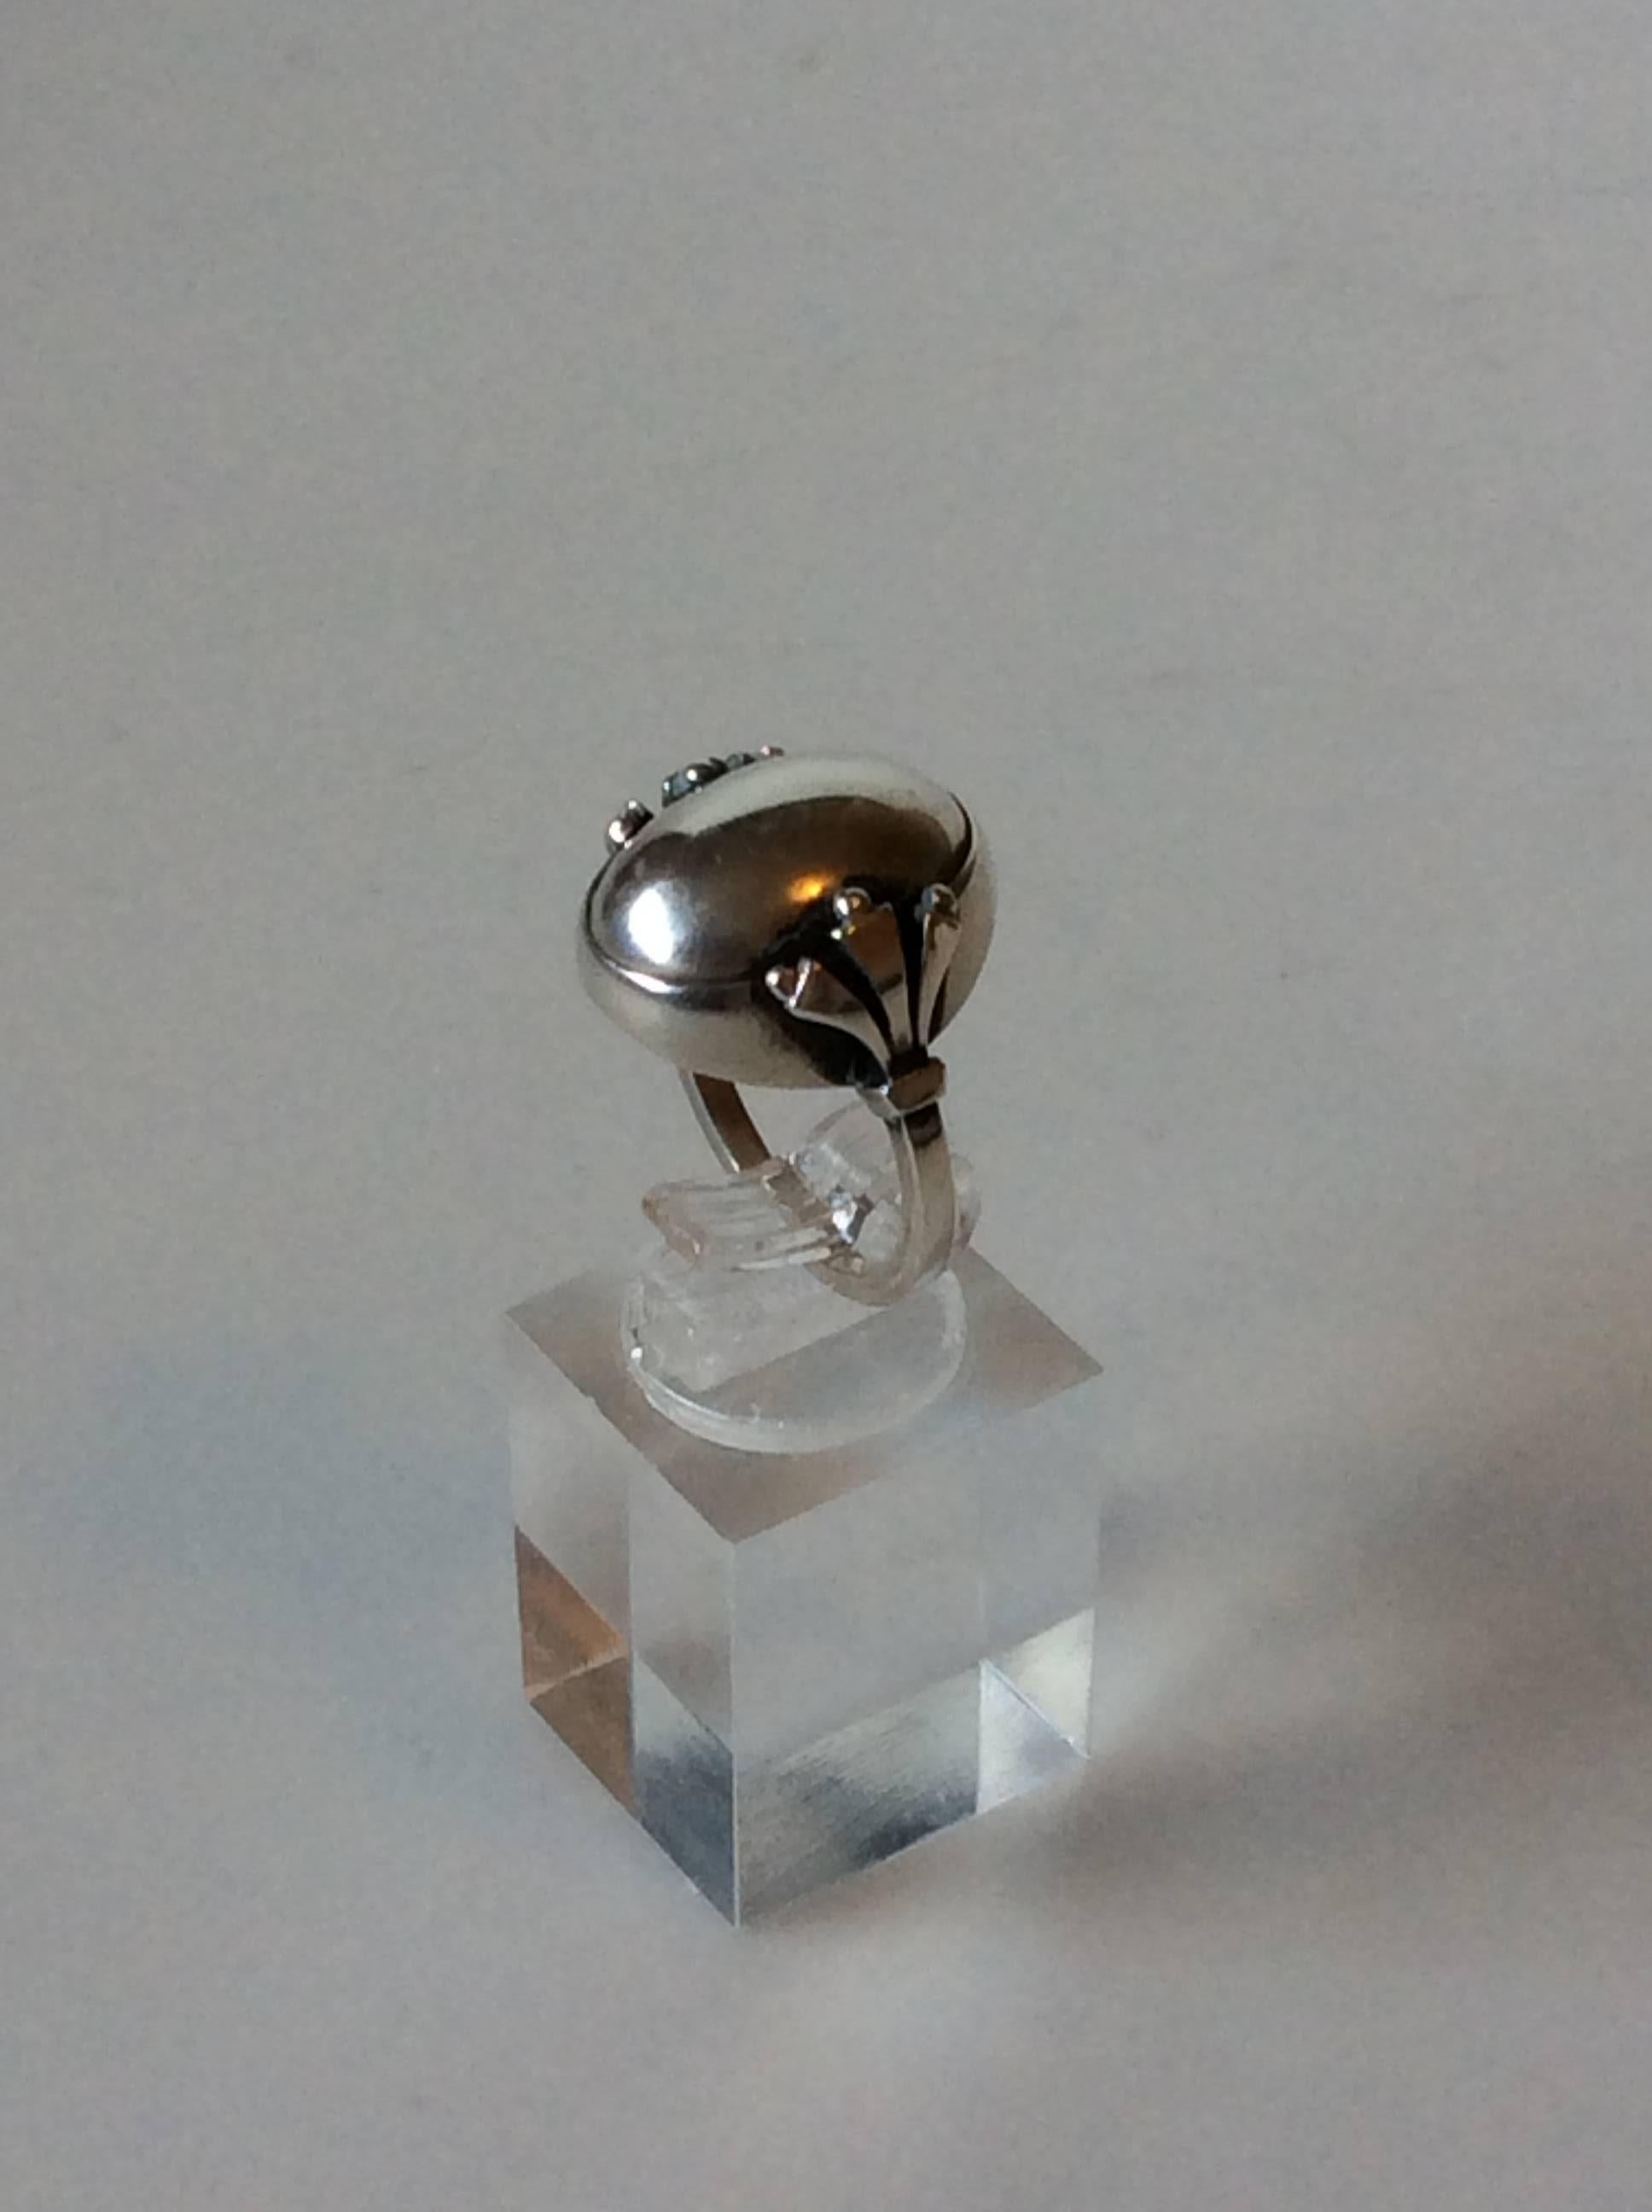 Georg Jensen Sterling Silver Ring with Silver Stone No. 51.

Ring size 54 or US 6 3/4.

Weight is: 8,76 grams / 0.310 oz.

Post 1945 marks